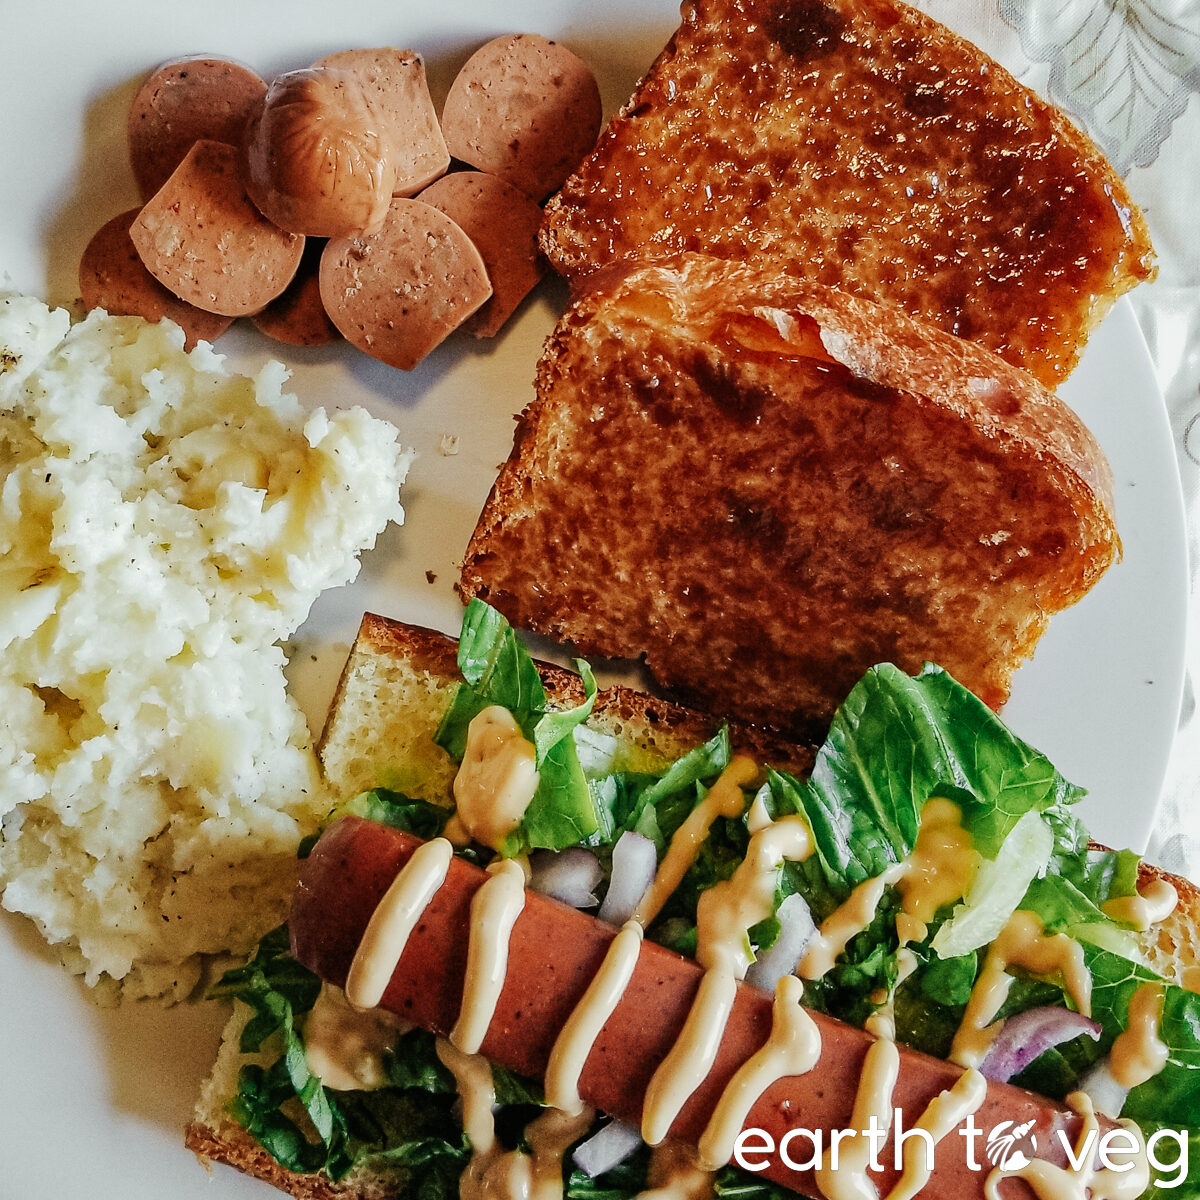 vegan hot dogs, toast, and mashed potatoes